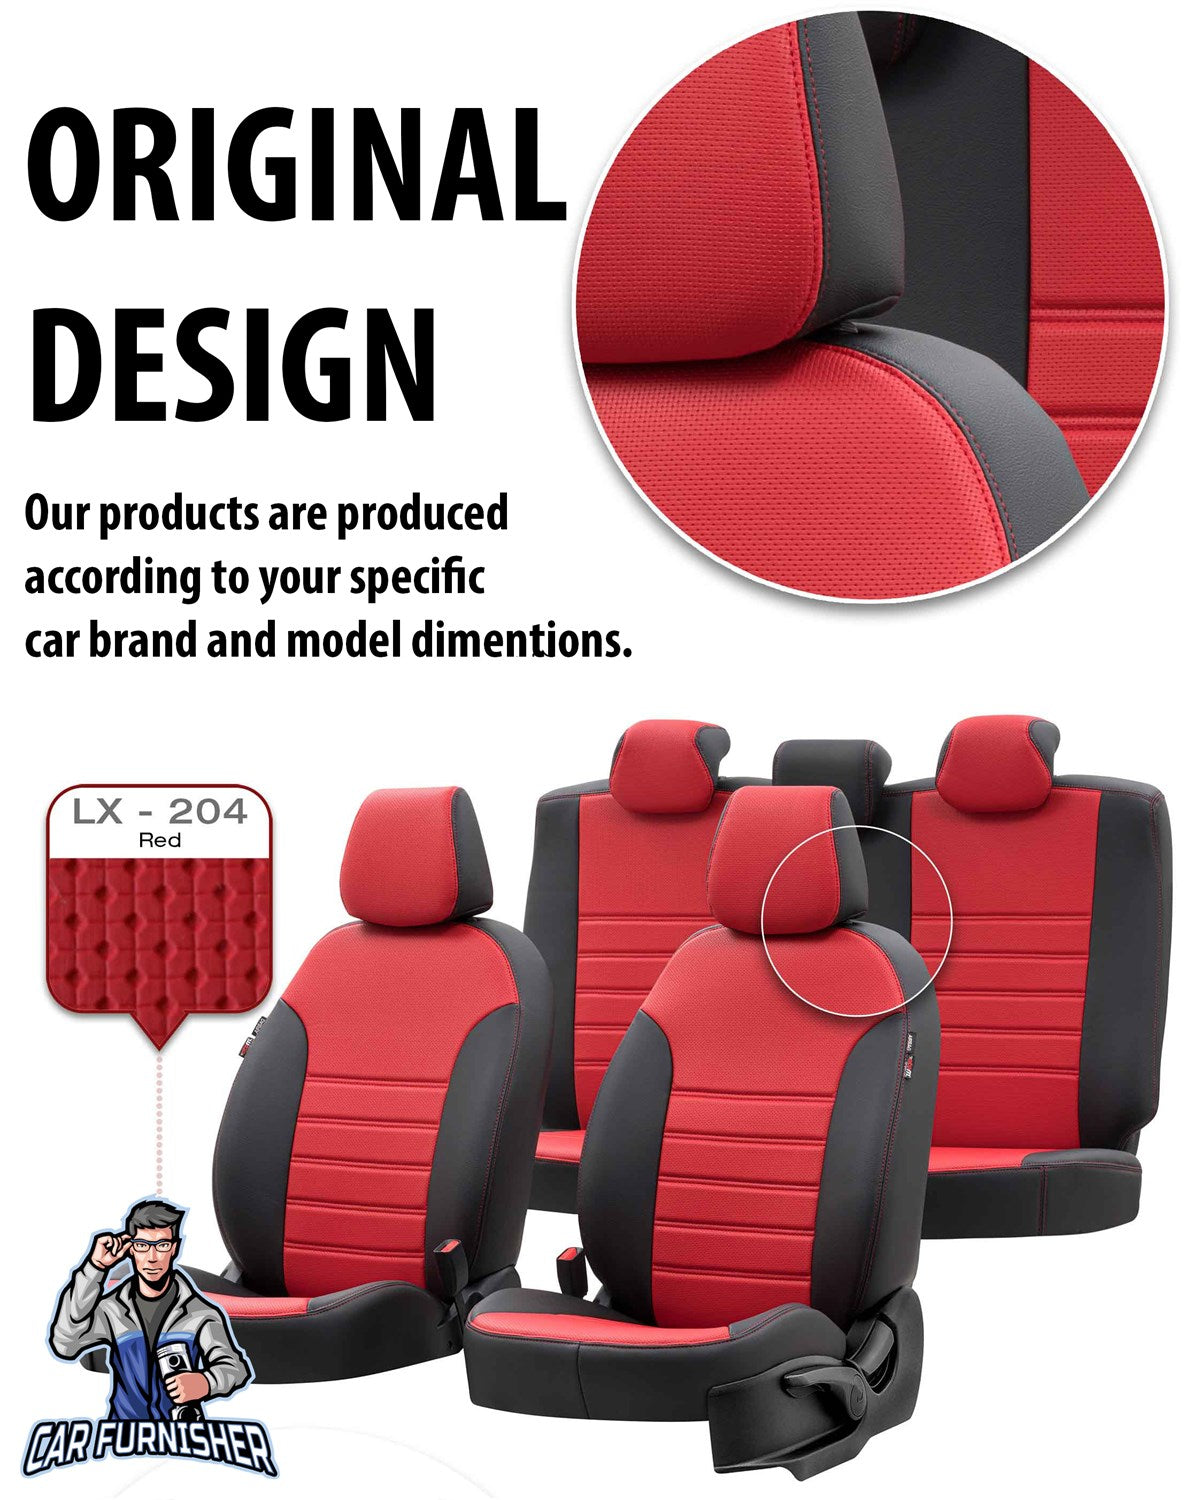 Volkswagen Golf Seat Cover New York Leather Design Smoked Black Leather